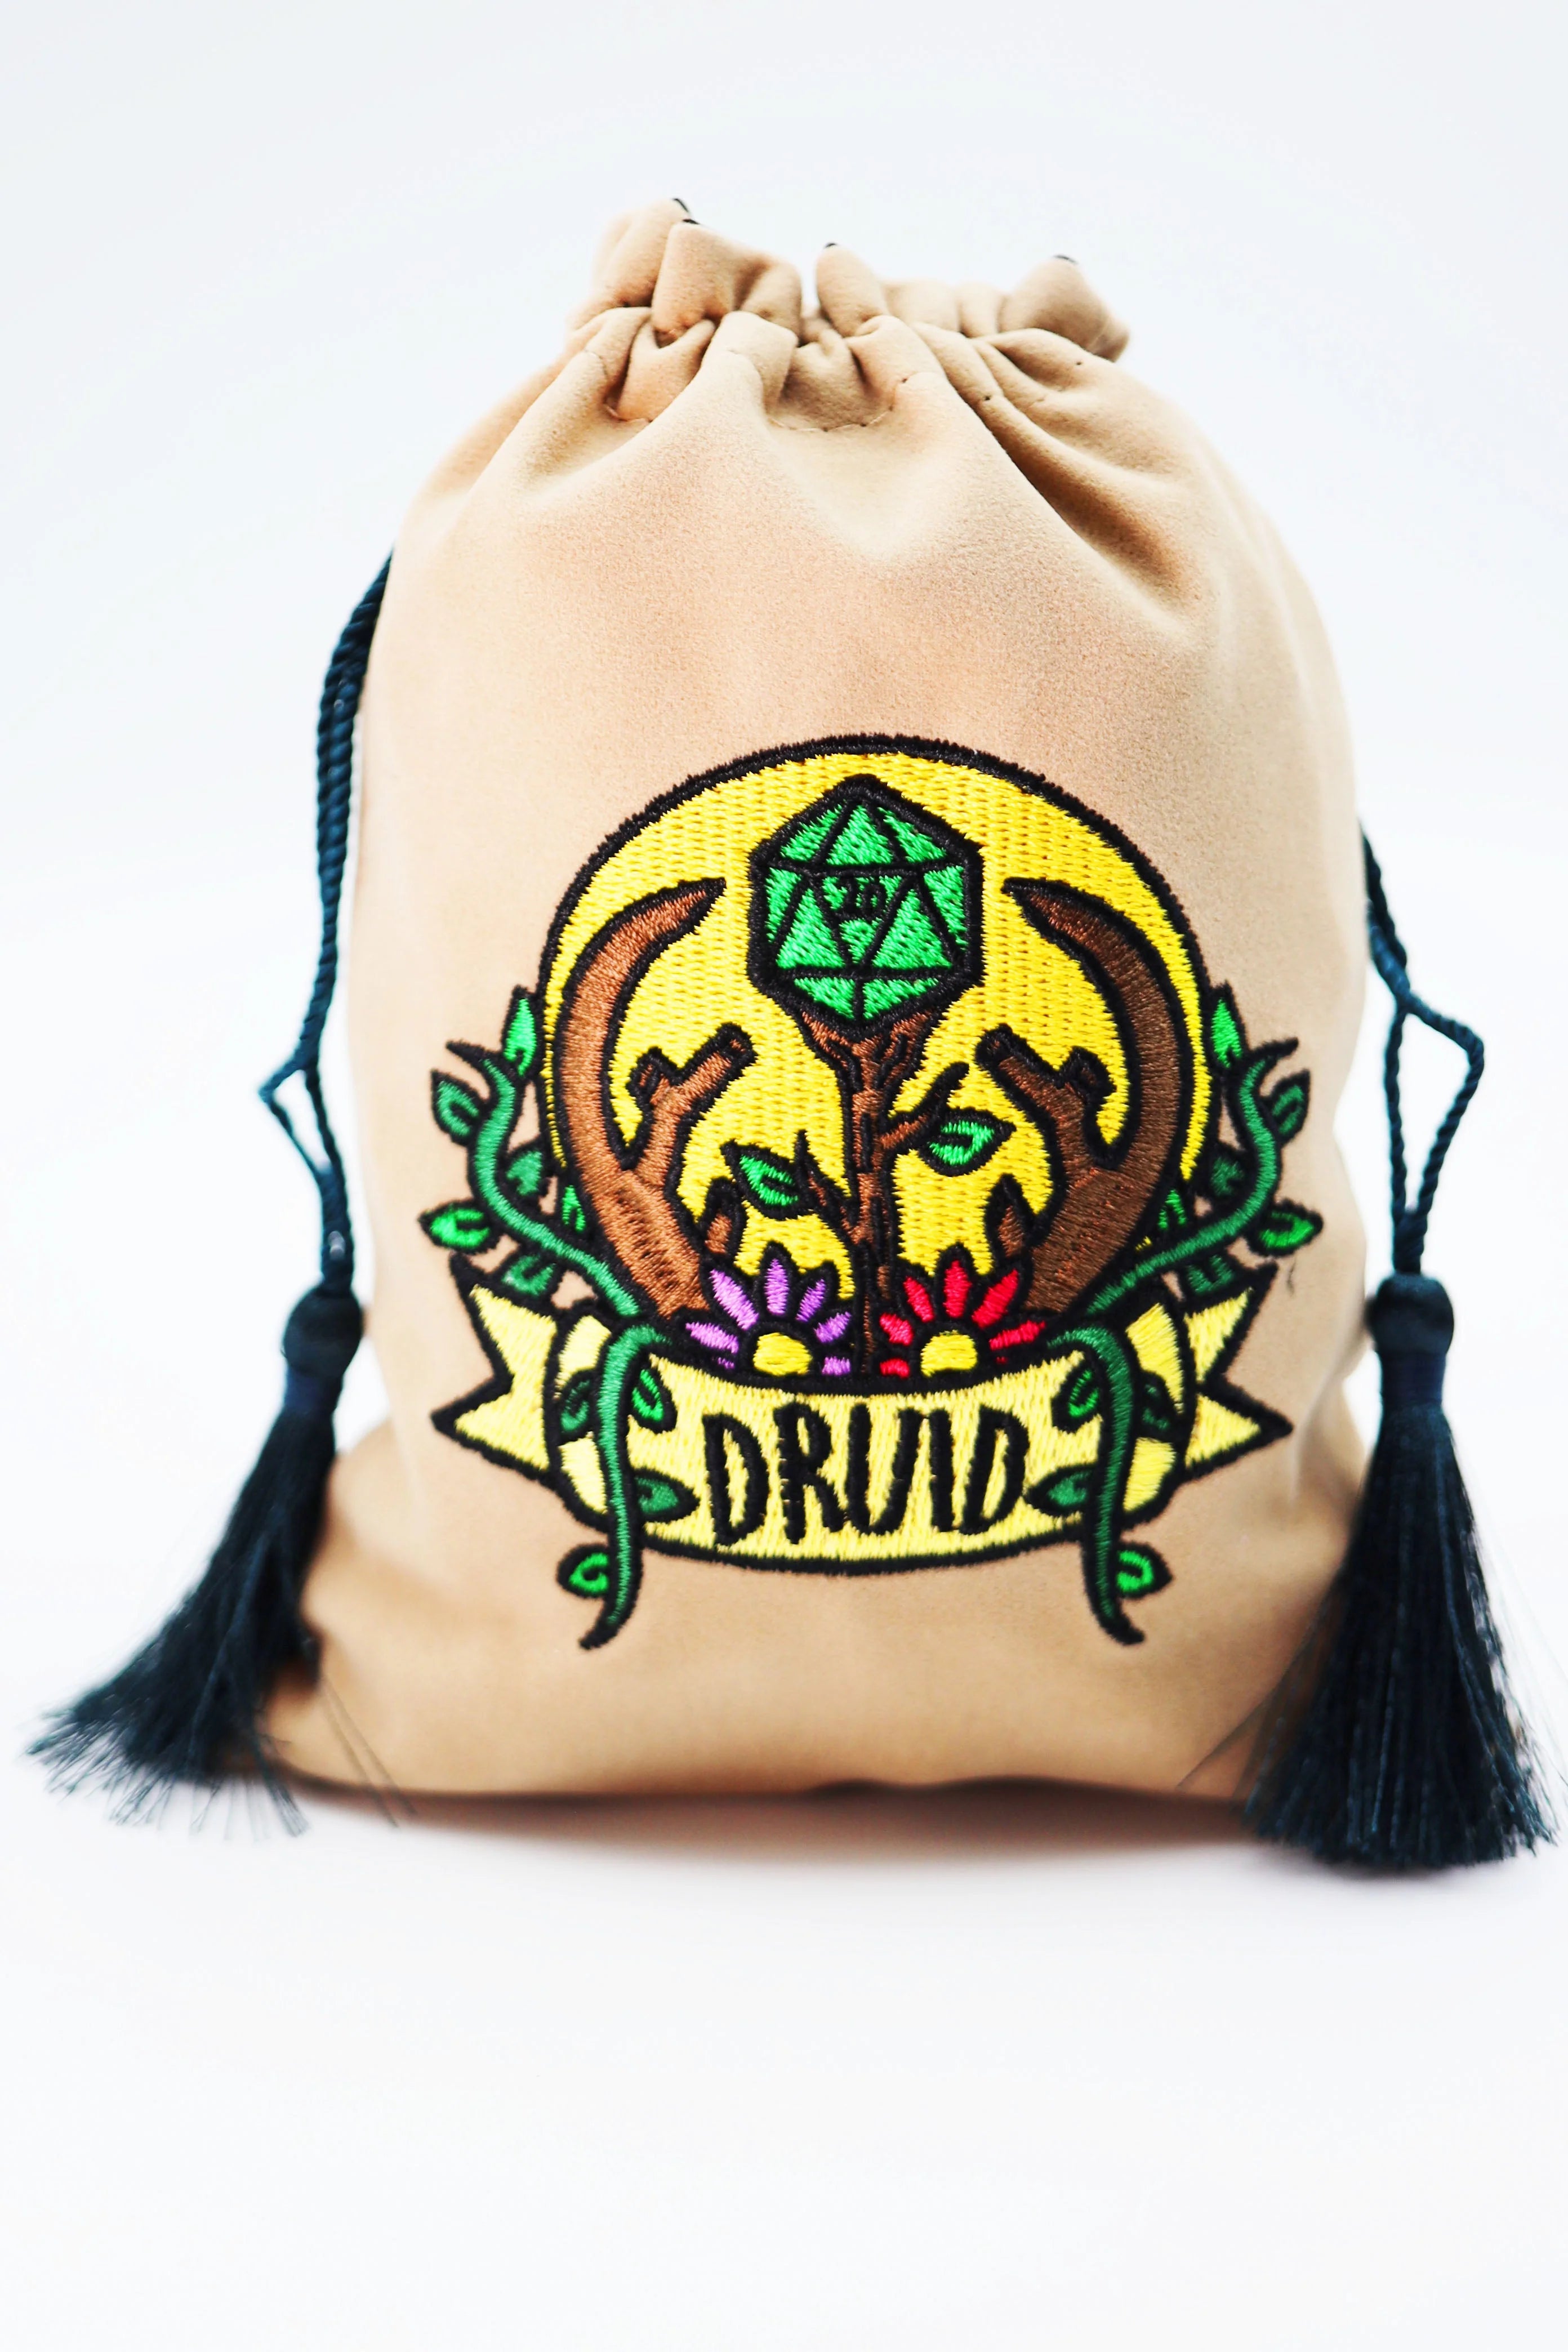 DICE BAG - DRUID Dice & Counters Foam Brain Games    | Red Claw Gaming